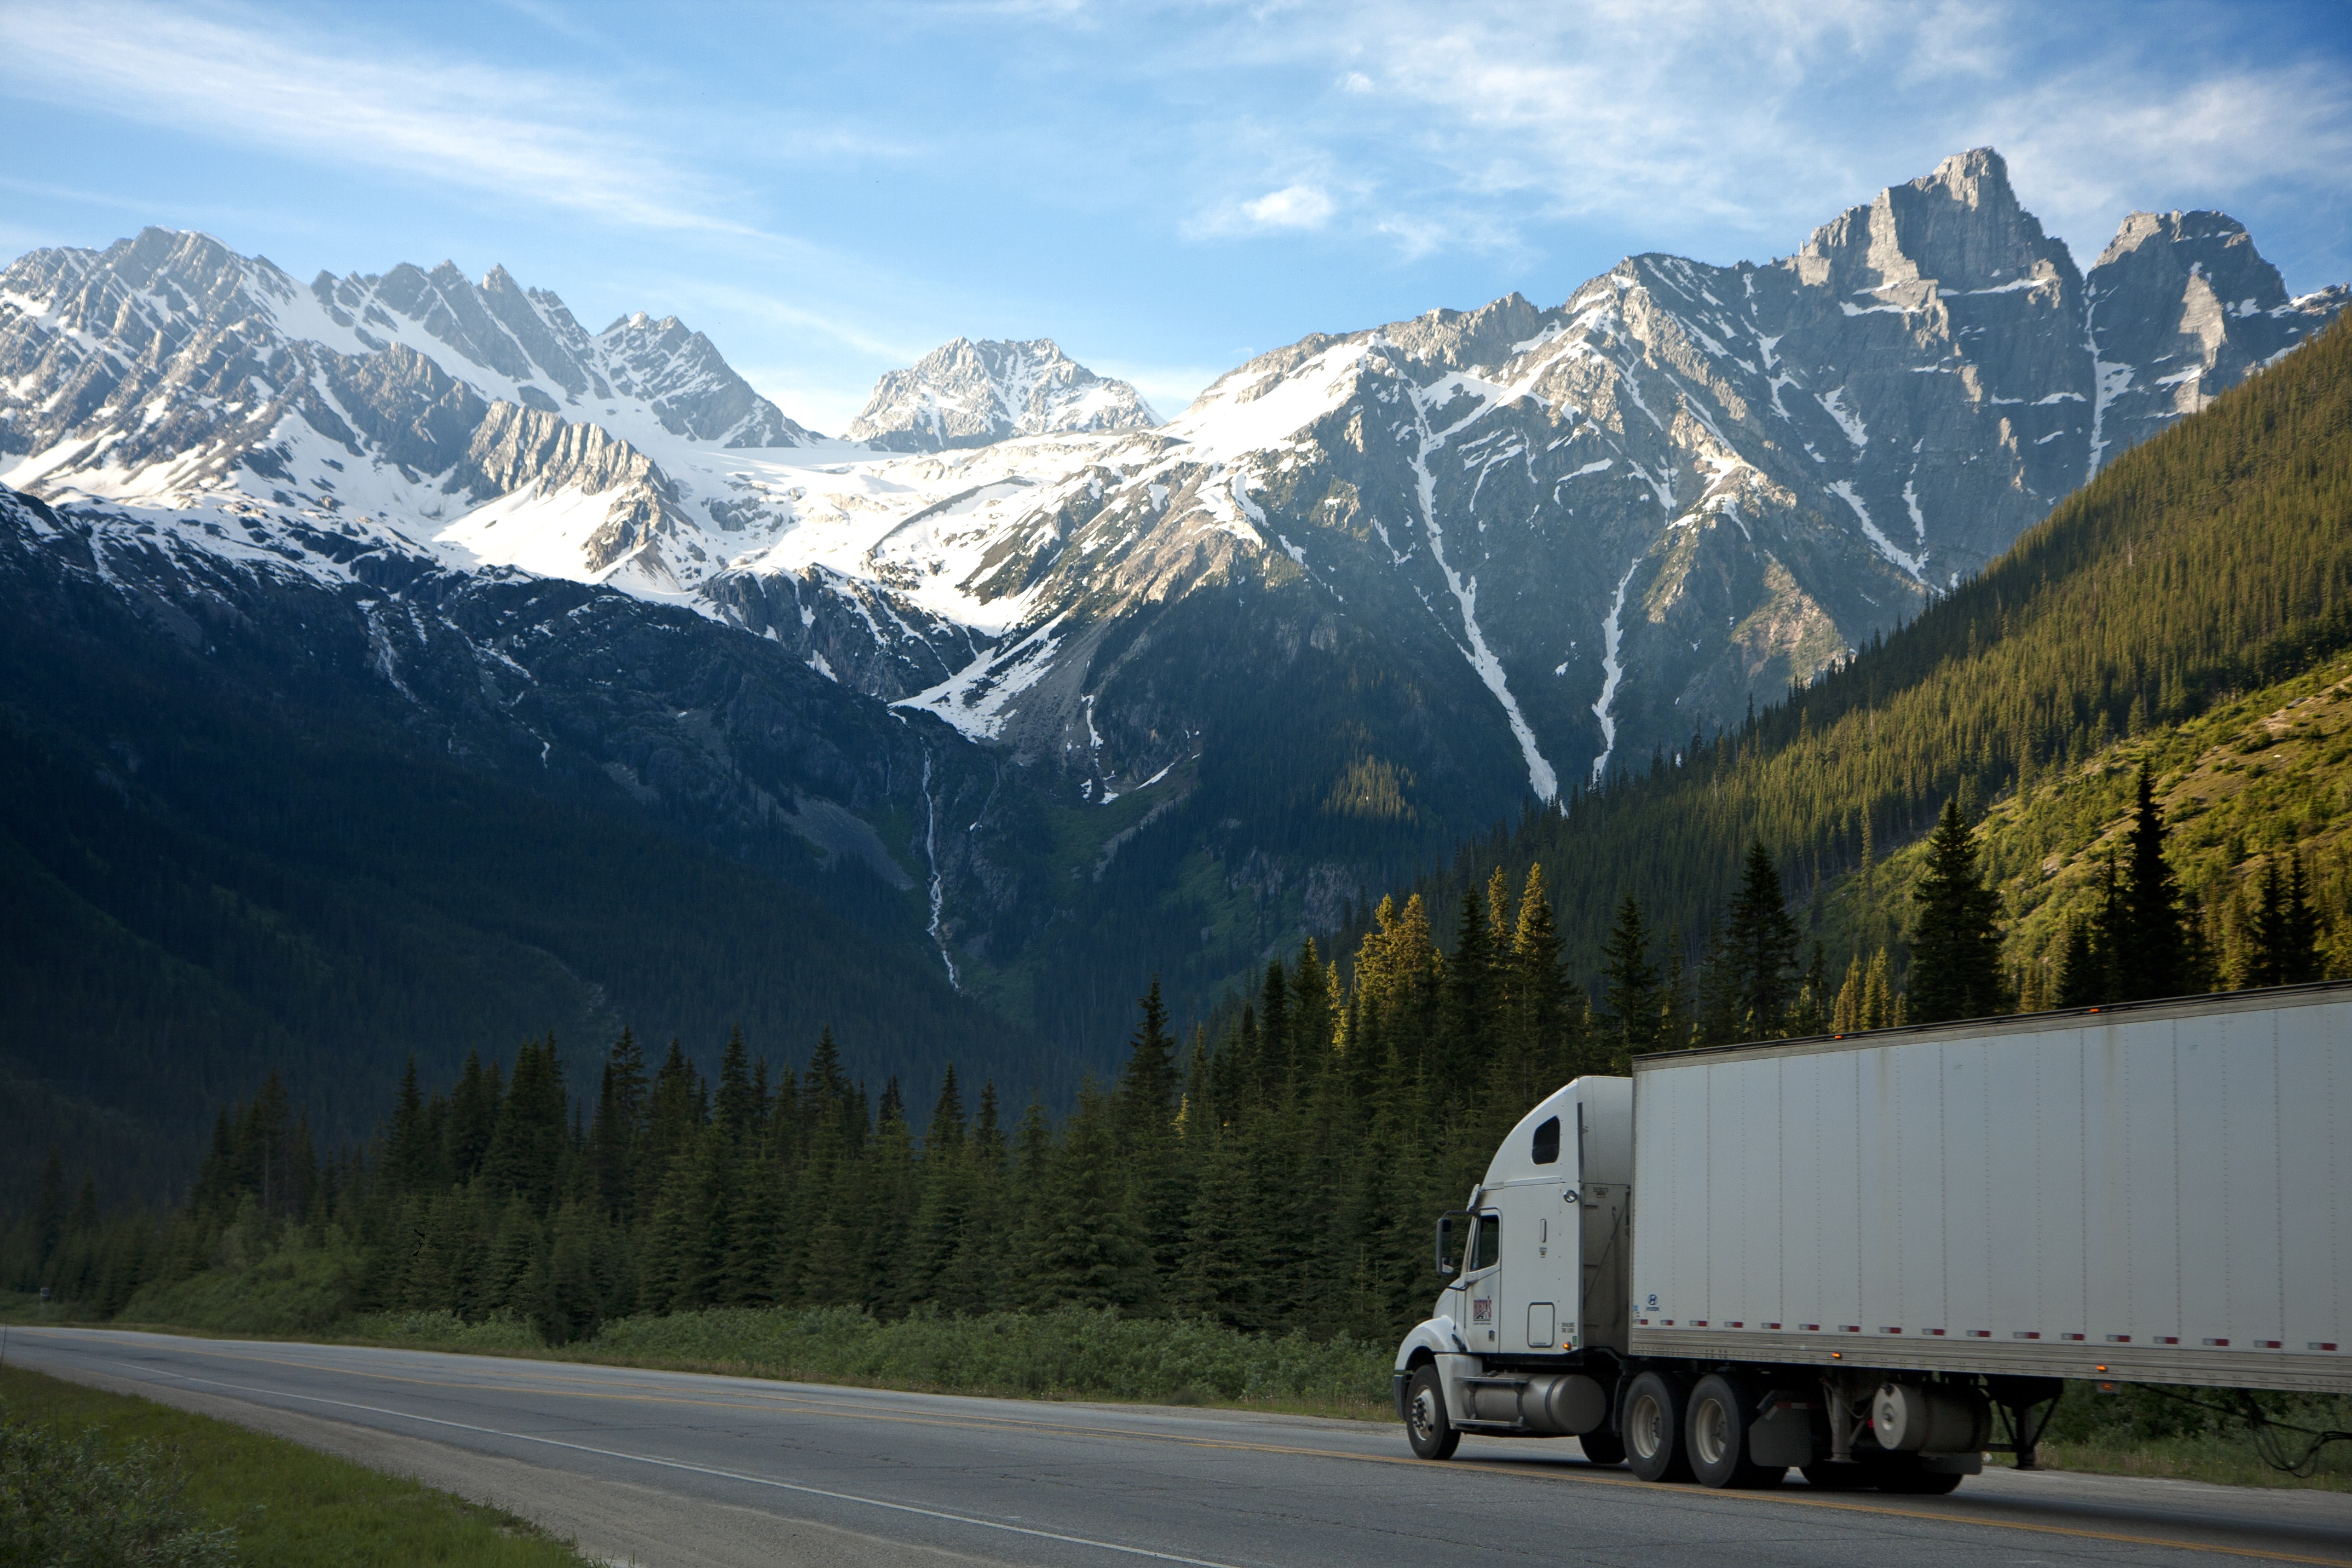 2020 HOS Rule Changes and their Effect on Trucker Workdays